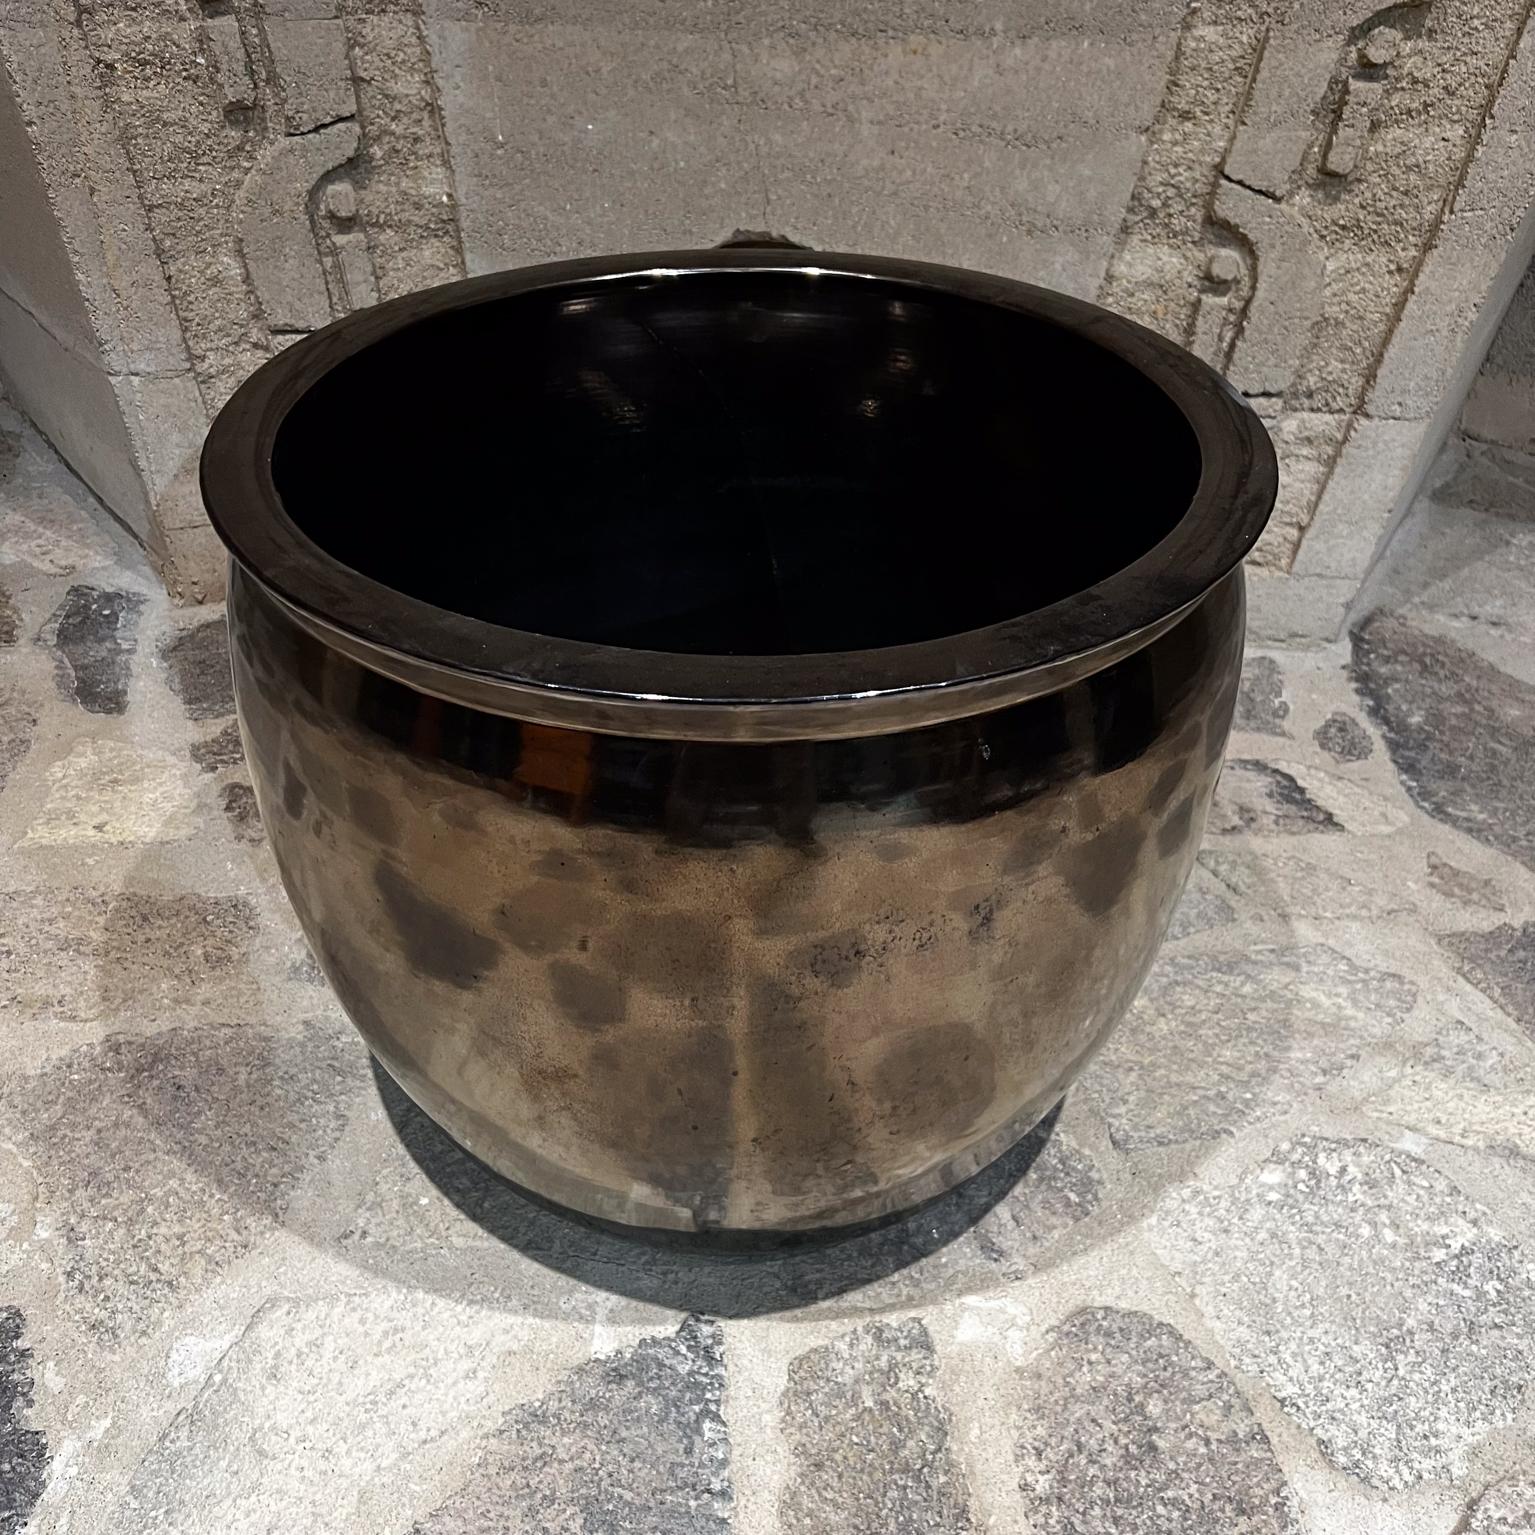 1980s Art Pottery Modern Ceramics Large Planter Pot in Metallic Bronze Finish
Unmarked attribution Gainey Pottery
23.5 diameter x 18.75 h
Preowned unrestored original vintage condition.
Review all images.